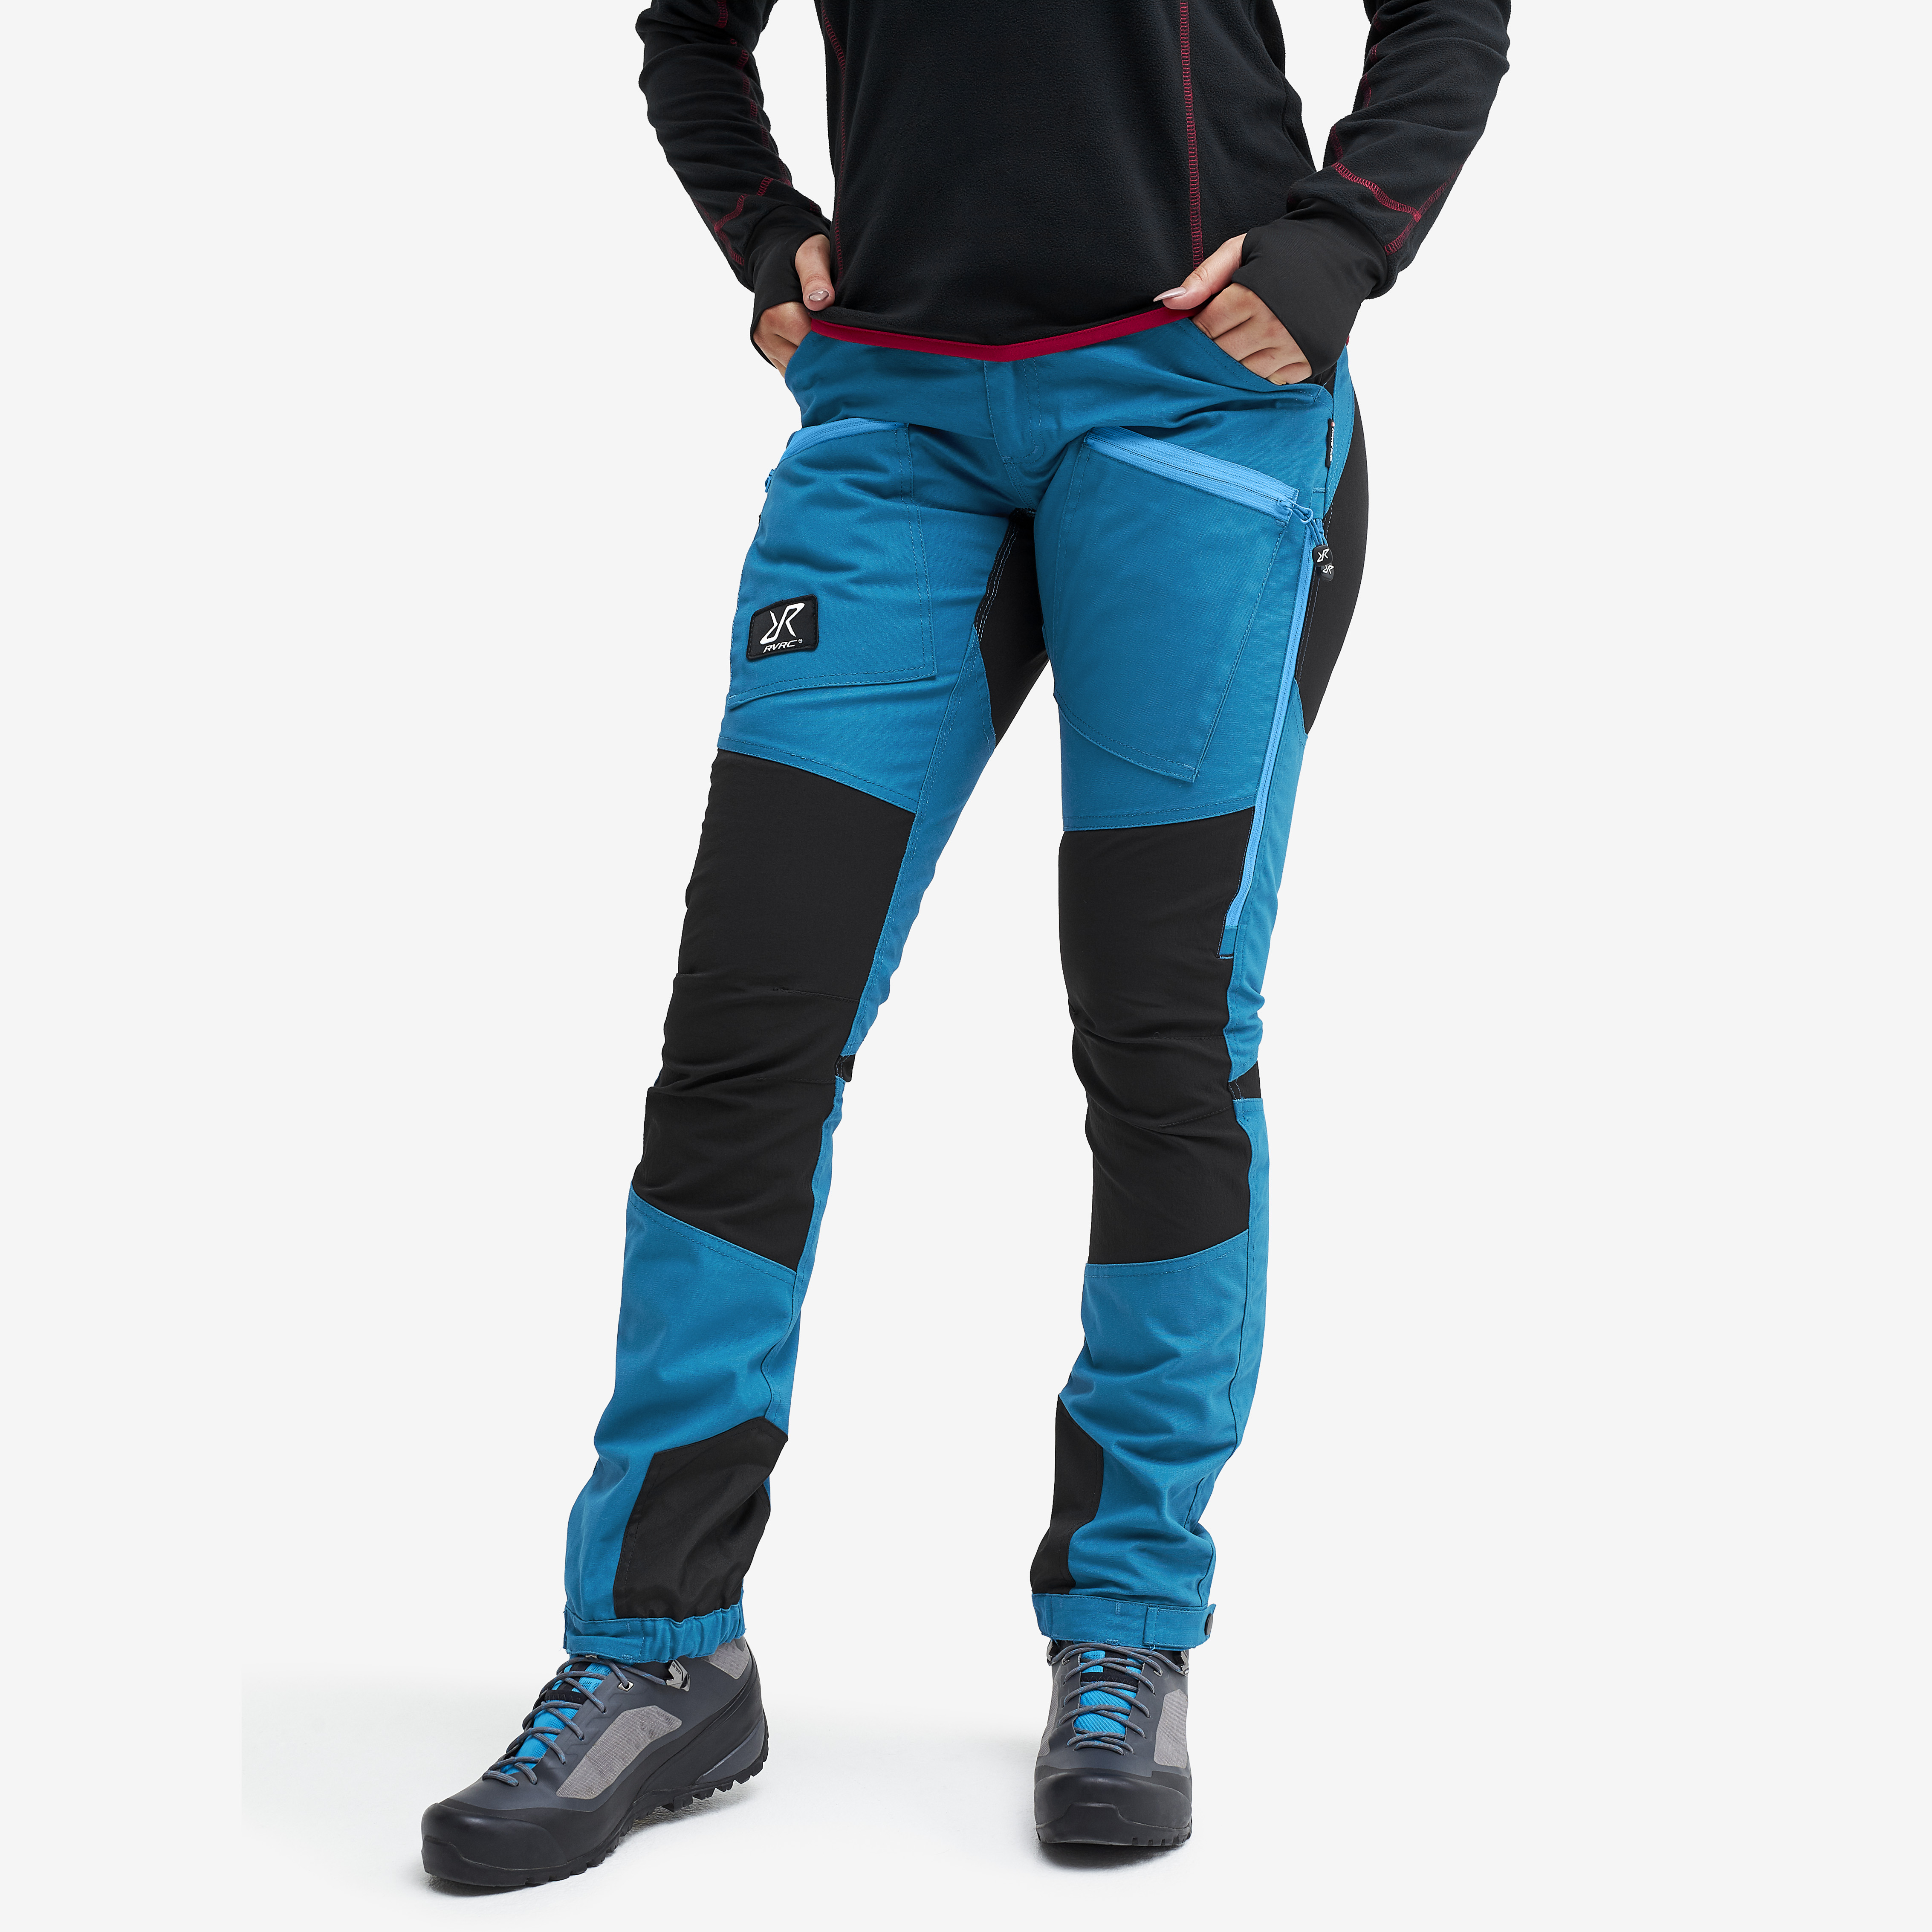 Nordwand Pro hiking trousers for women in blue